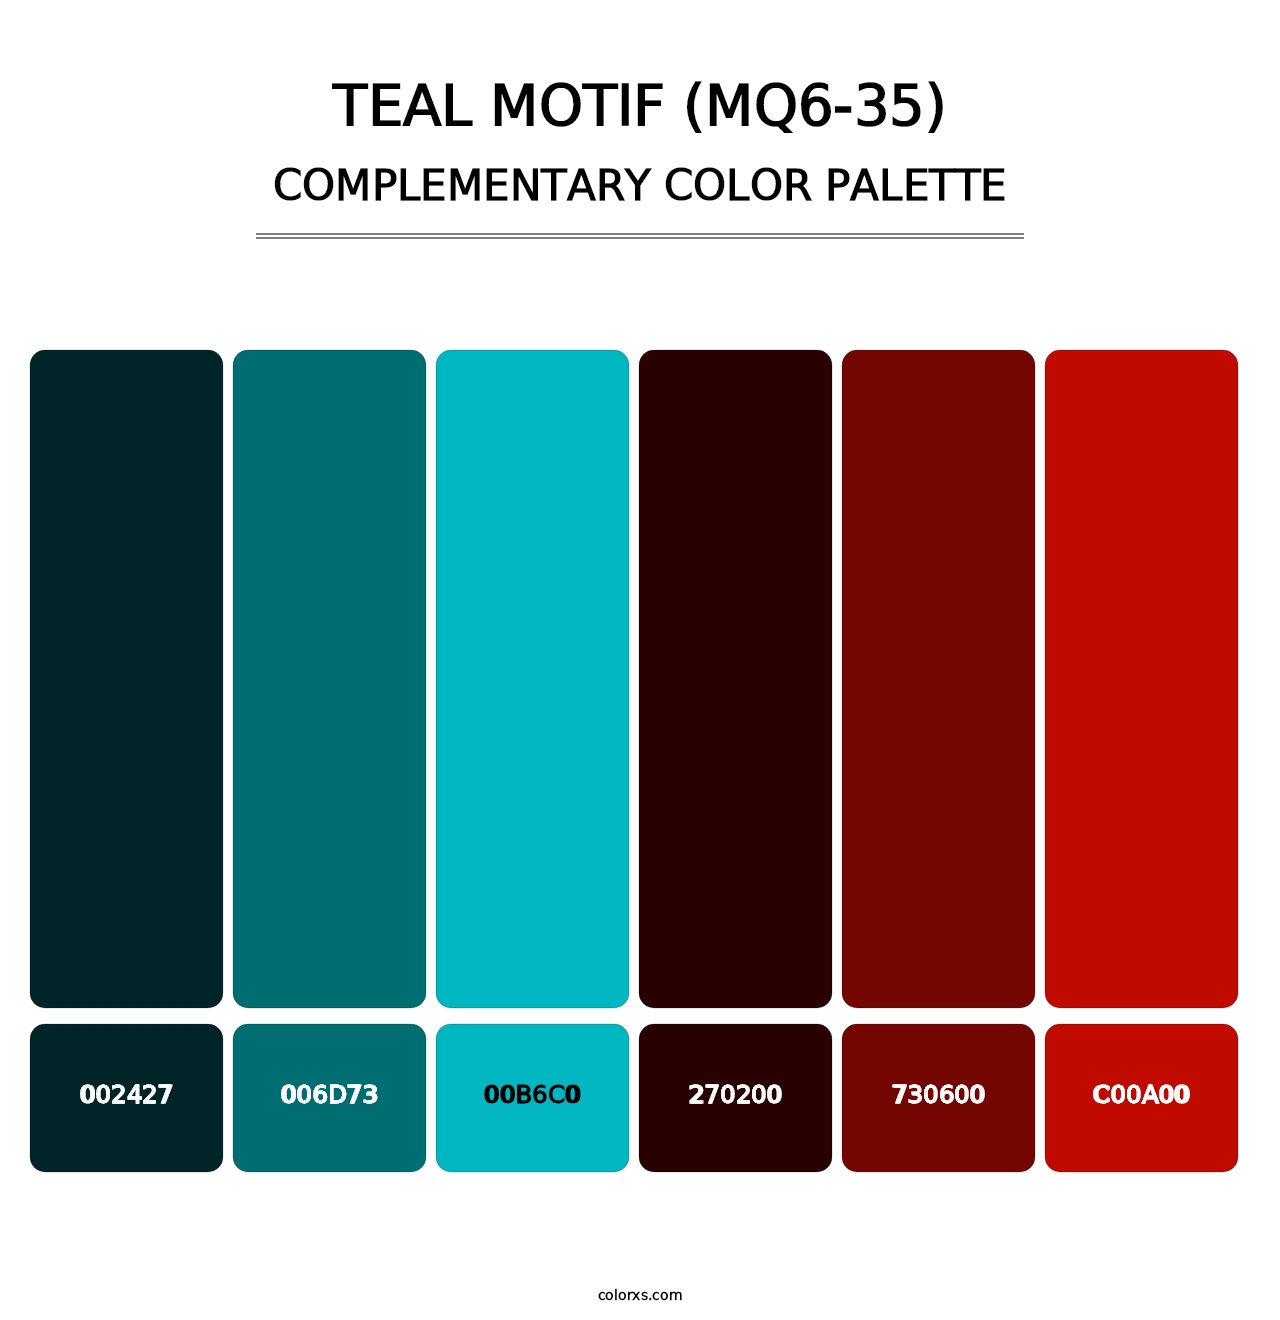 Teal Motif (MQ6-35) - Complementary Color Palette